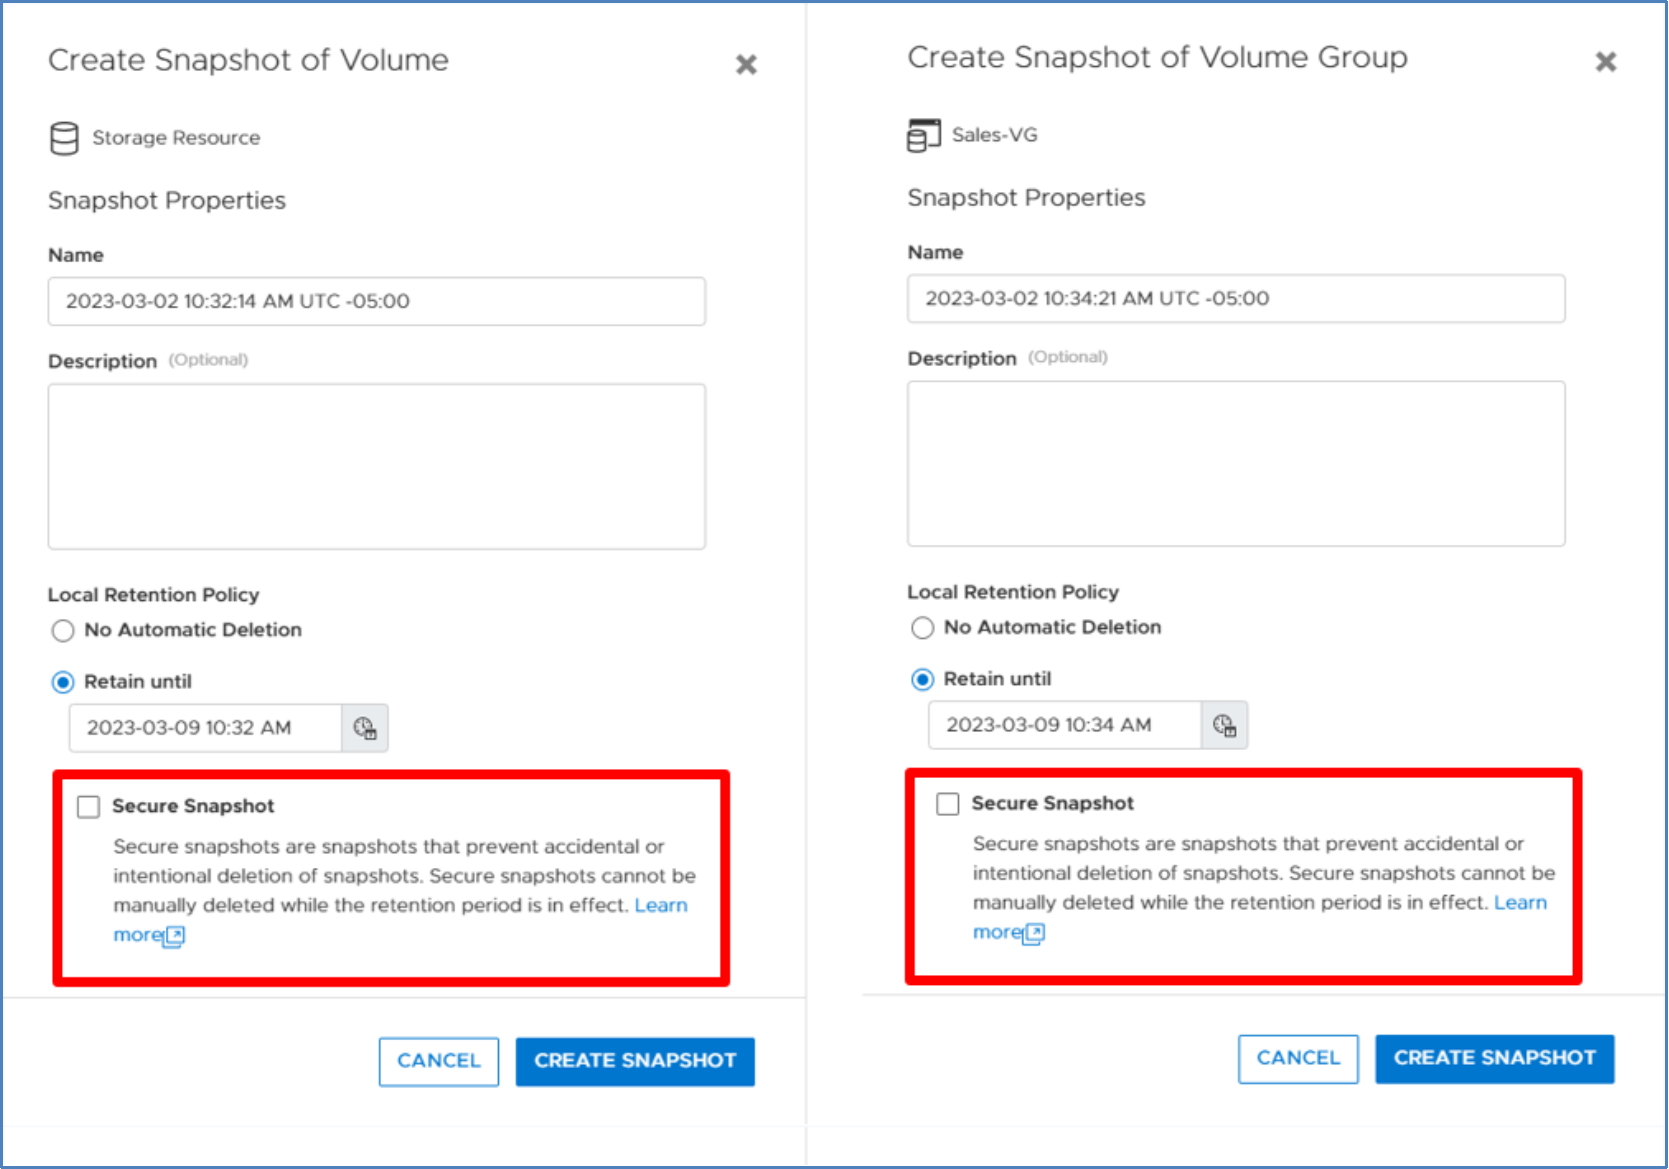 The Create Snapshot of Volume and Create Snapshot of Volume Group windows are very similar as shown here. PowerStore allows Secure Snapshots to be created for both.